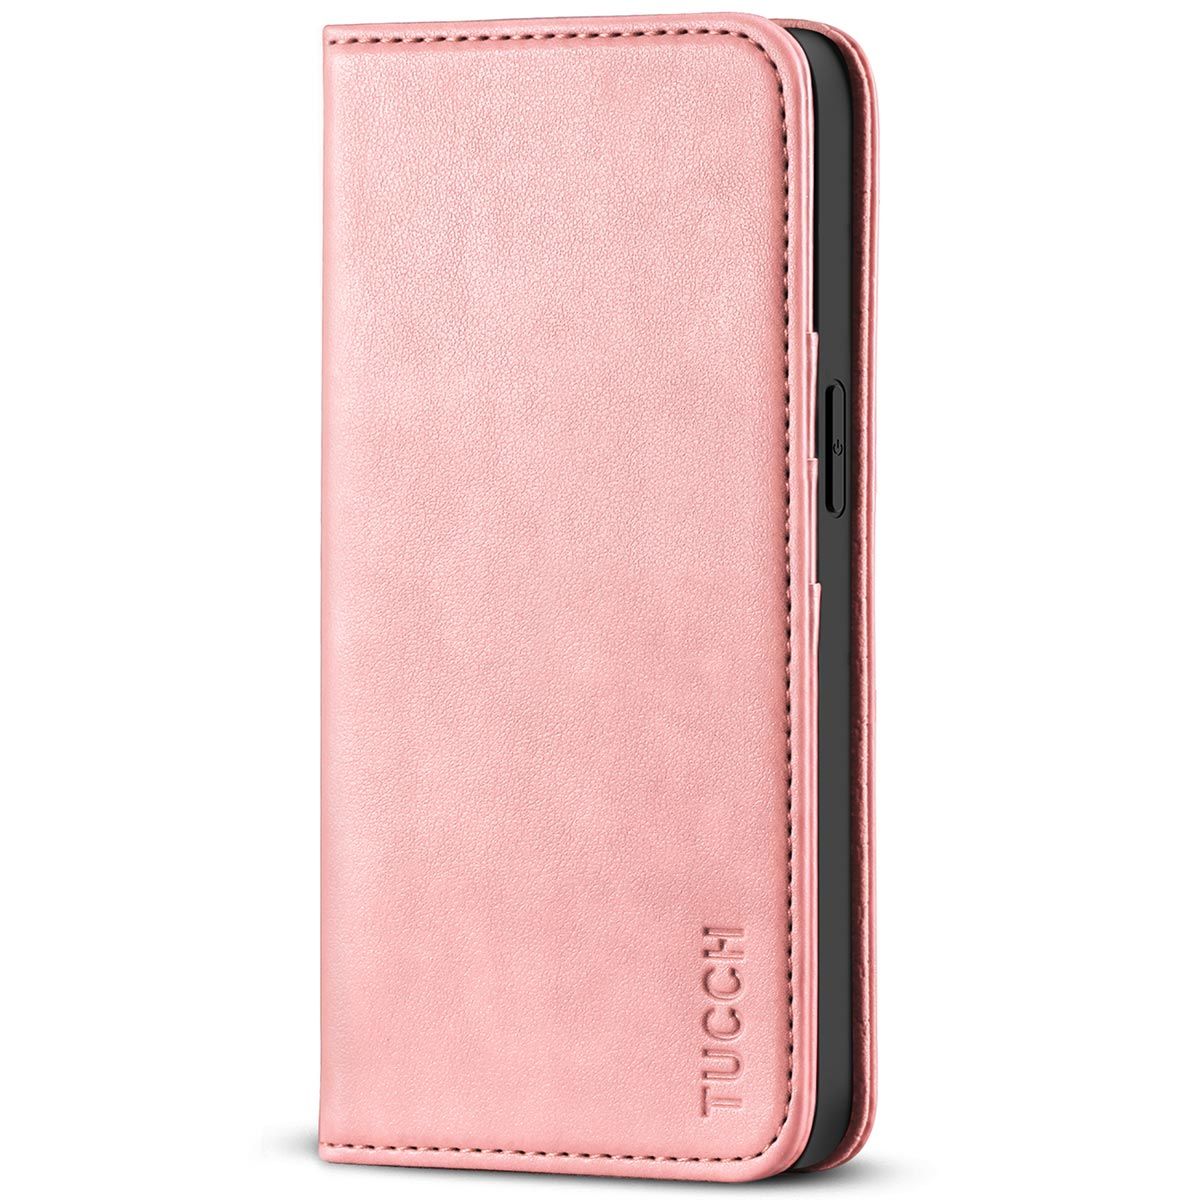 TUCCH iPhone 14 Pro Case, iPhone 14 Pro Leather Case, Flip Cover with Stand, Credit Card Slots, Magnetic Closure for iPhone 14 Pro 6.1-inch 5G 2022